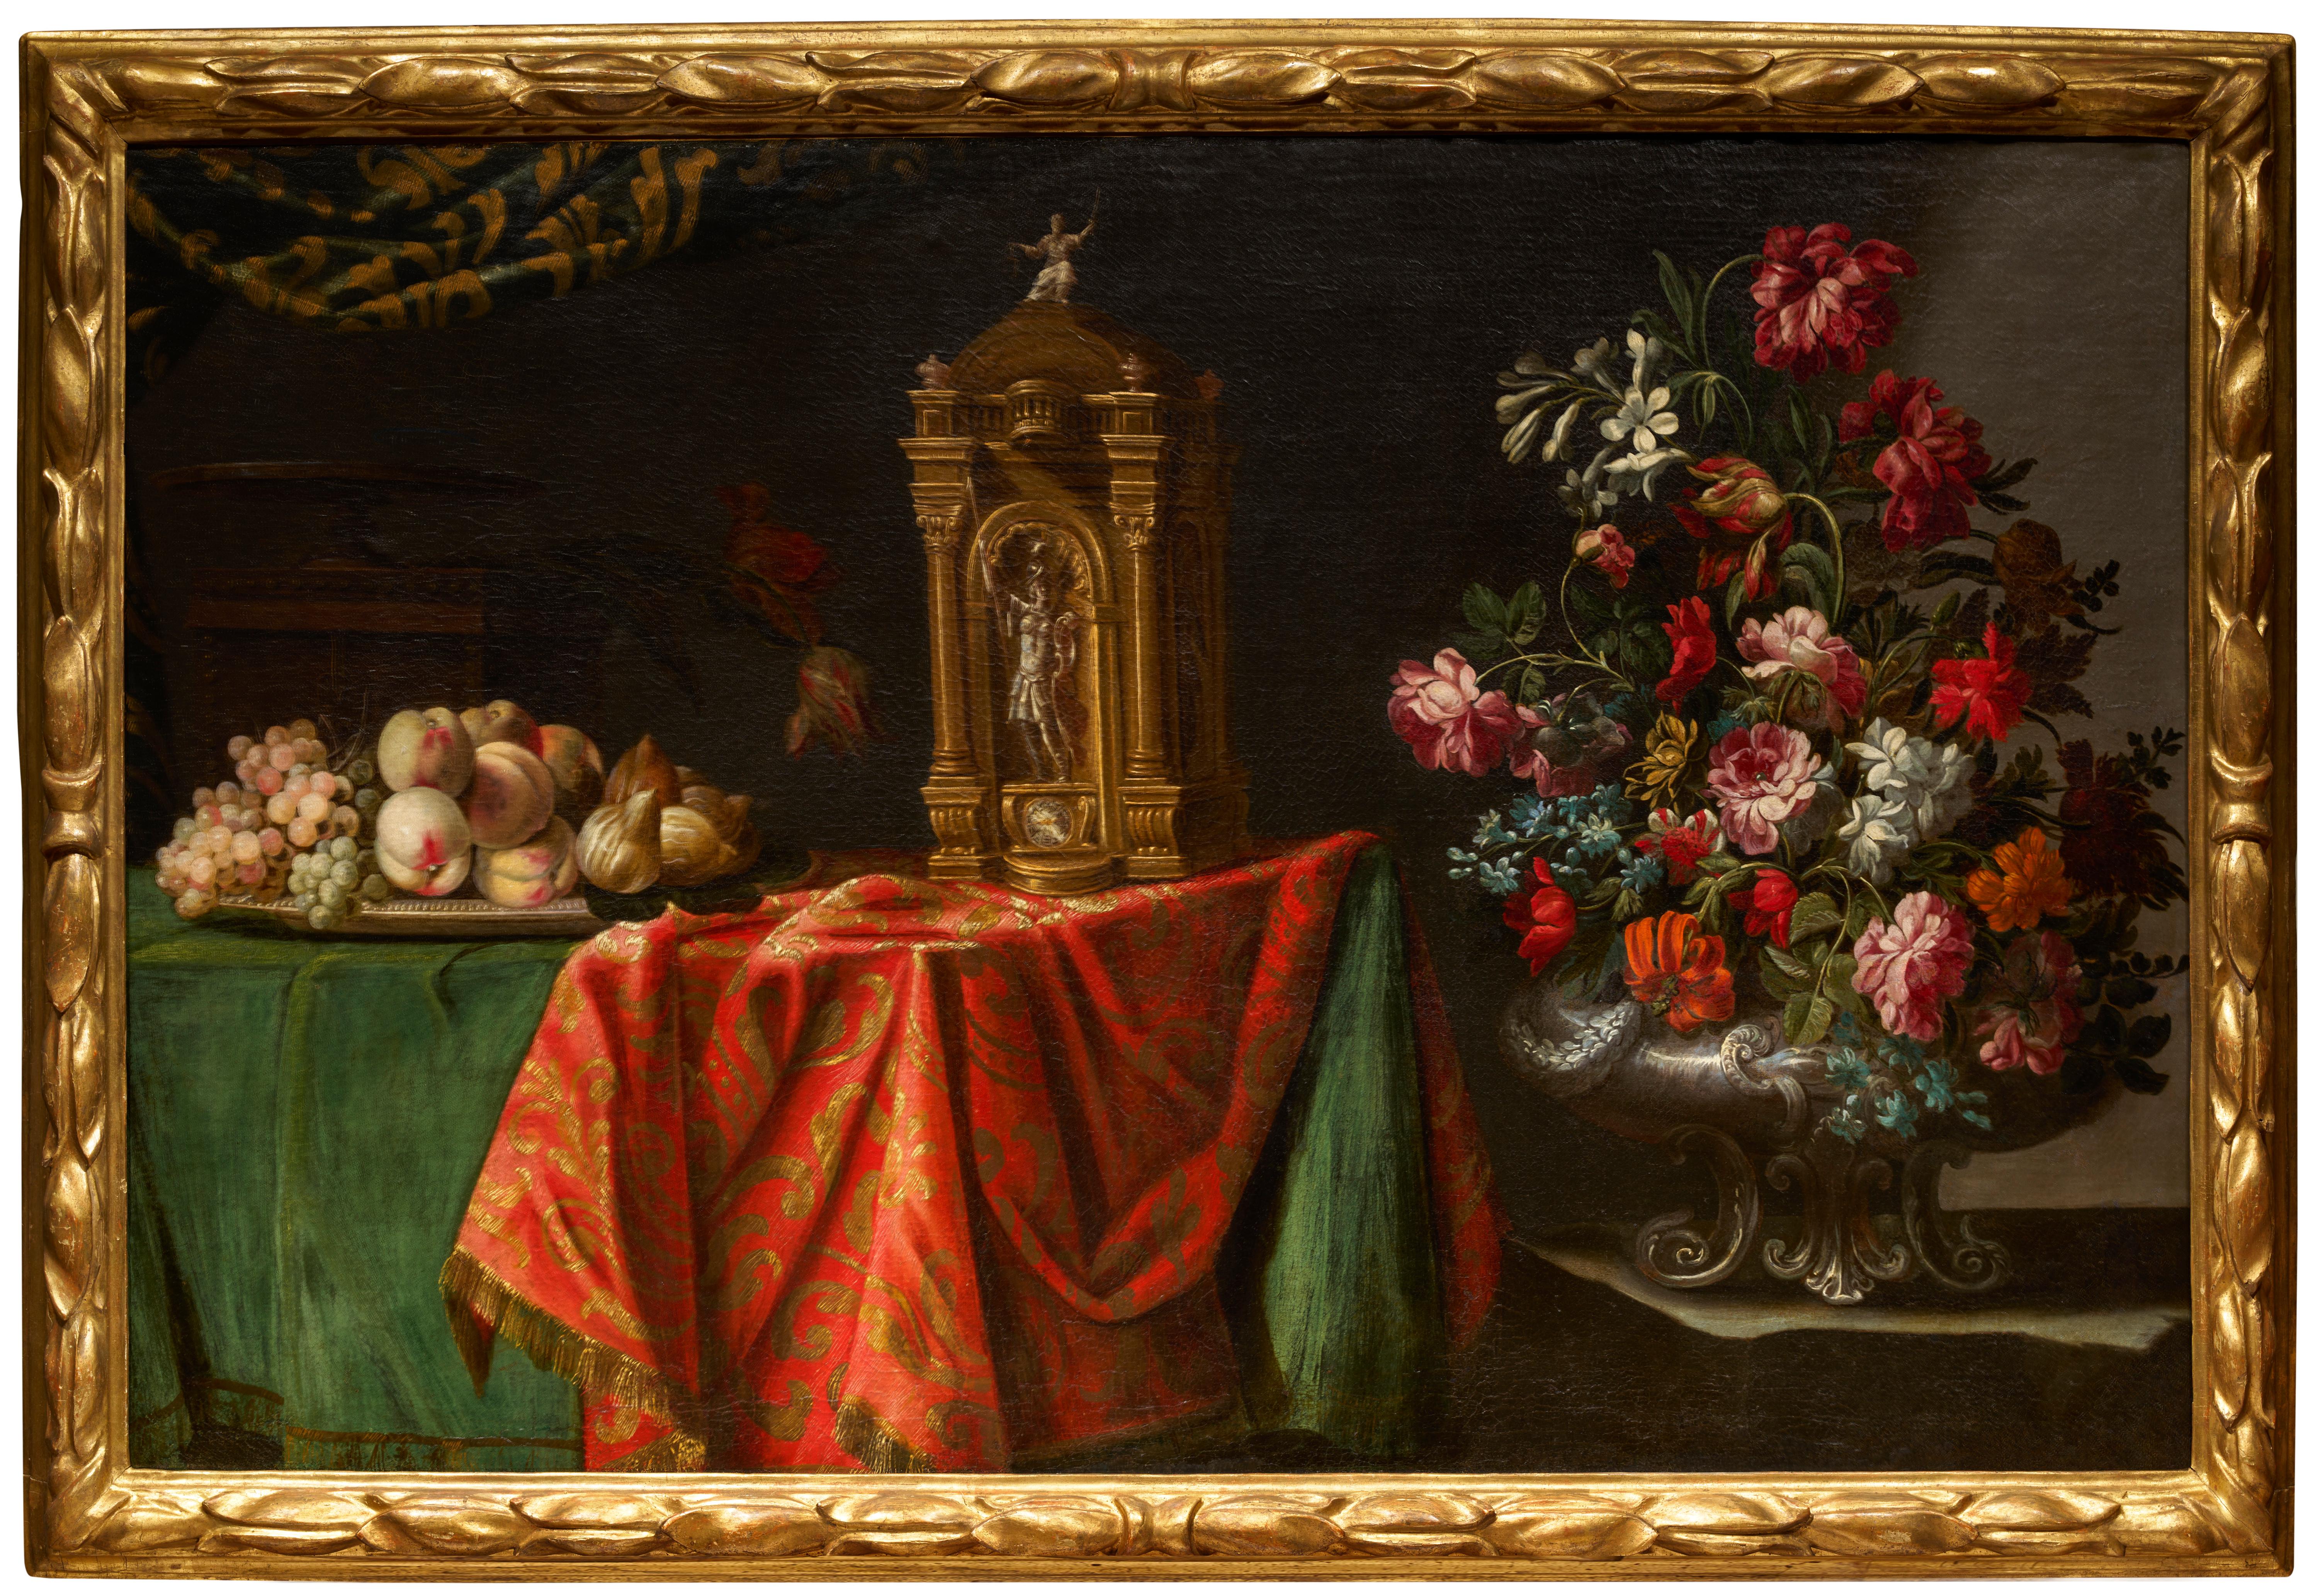 Adeodato Zuccati Interior Painting - Baroque silver Vase with Flowers with a Fruit Tray and a Clock by A. Zuccati 